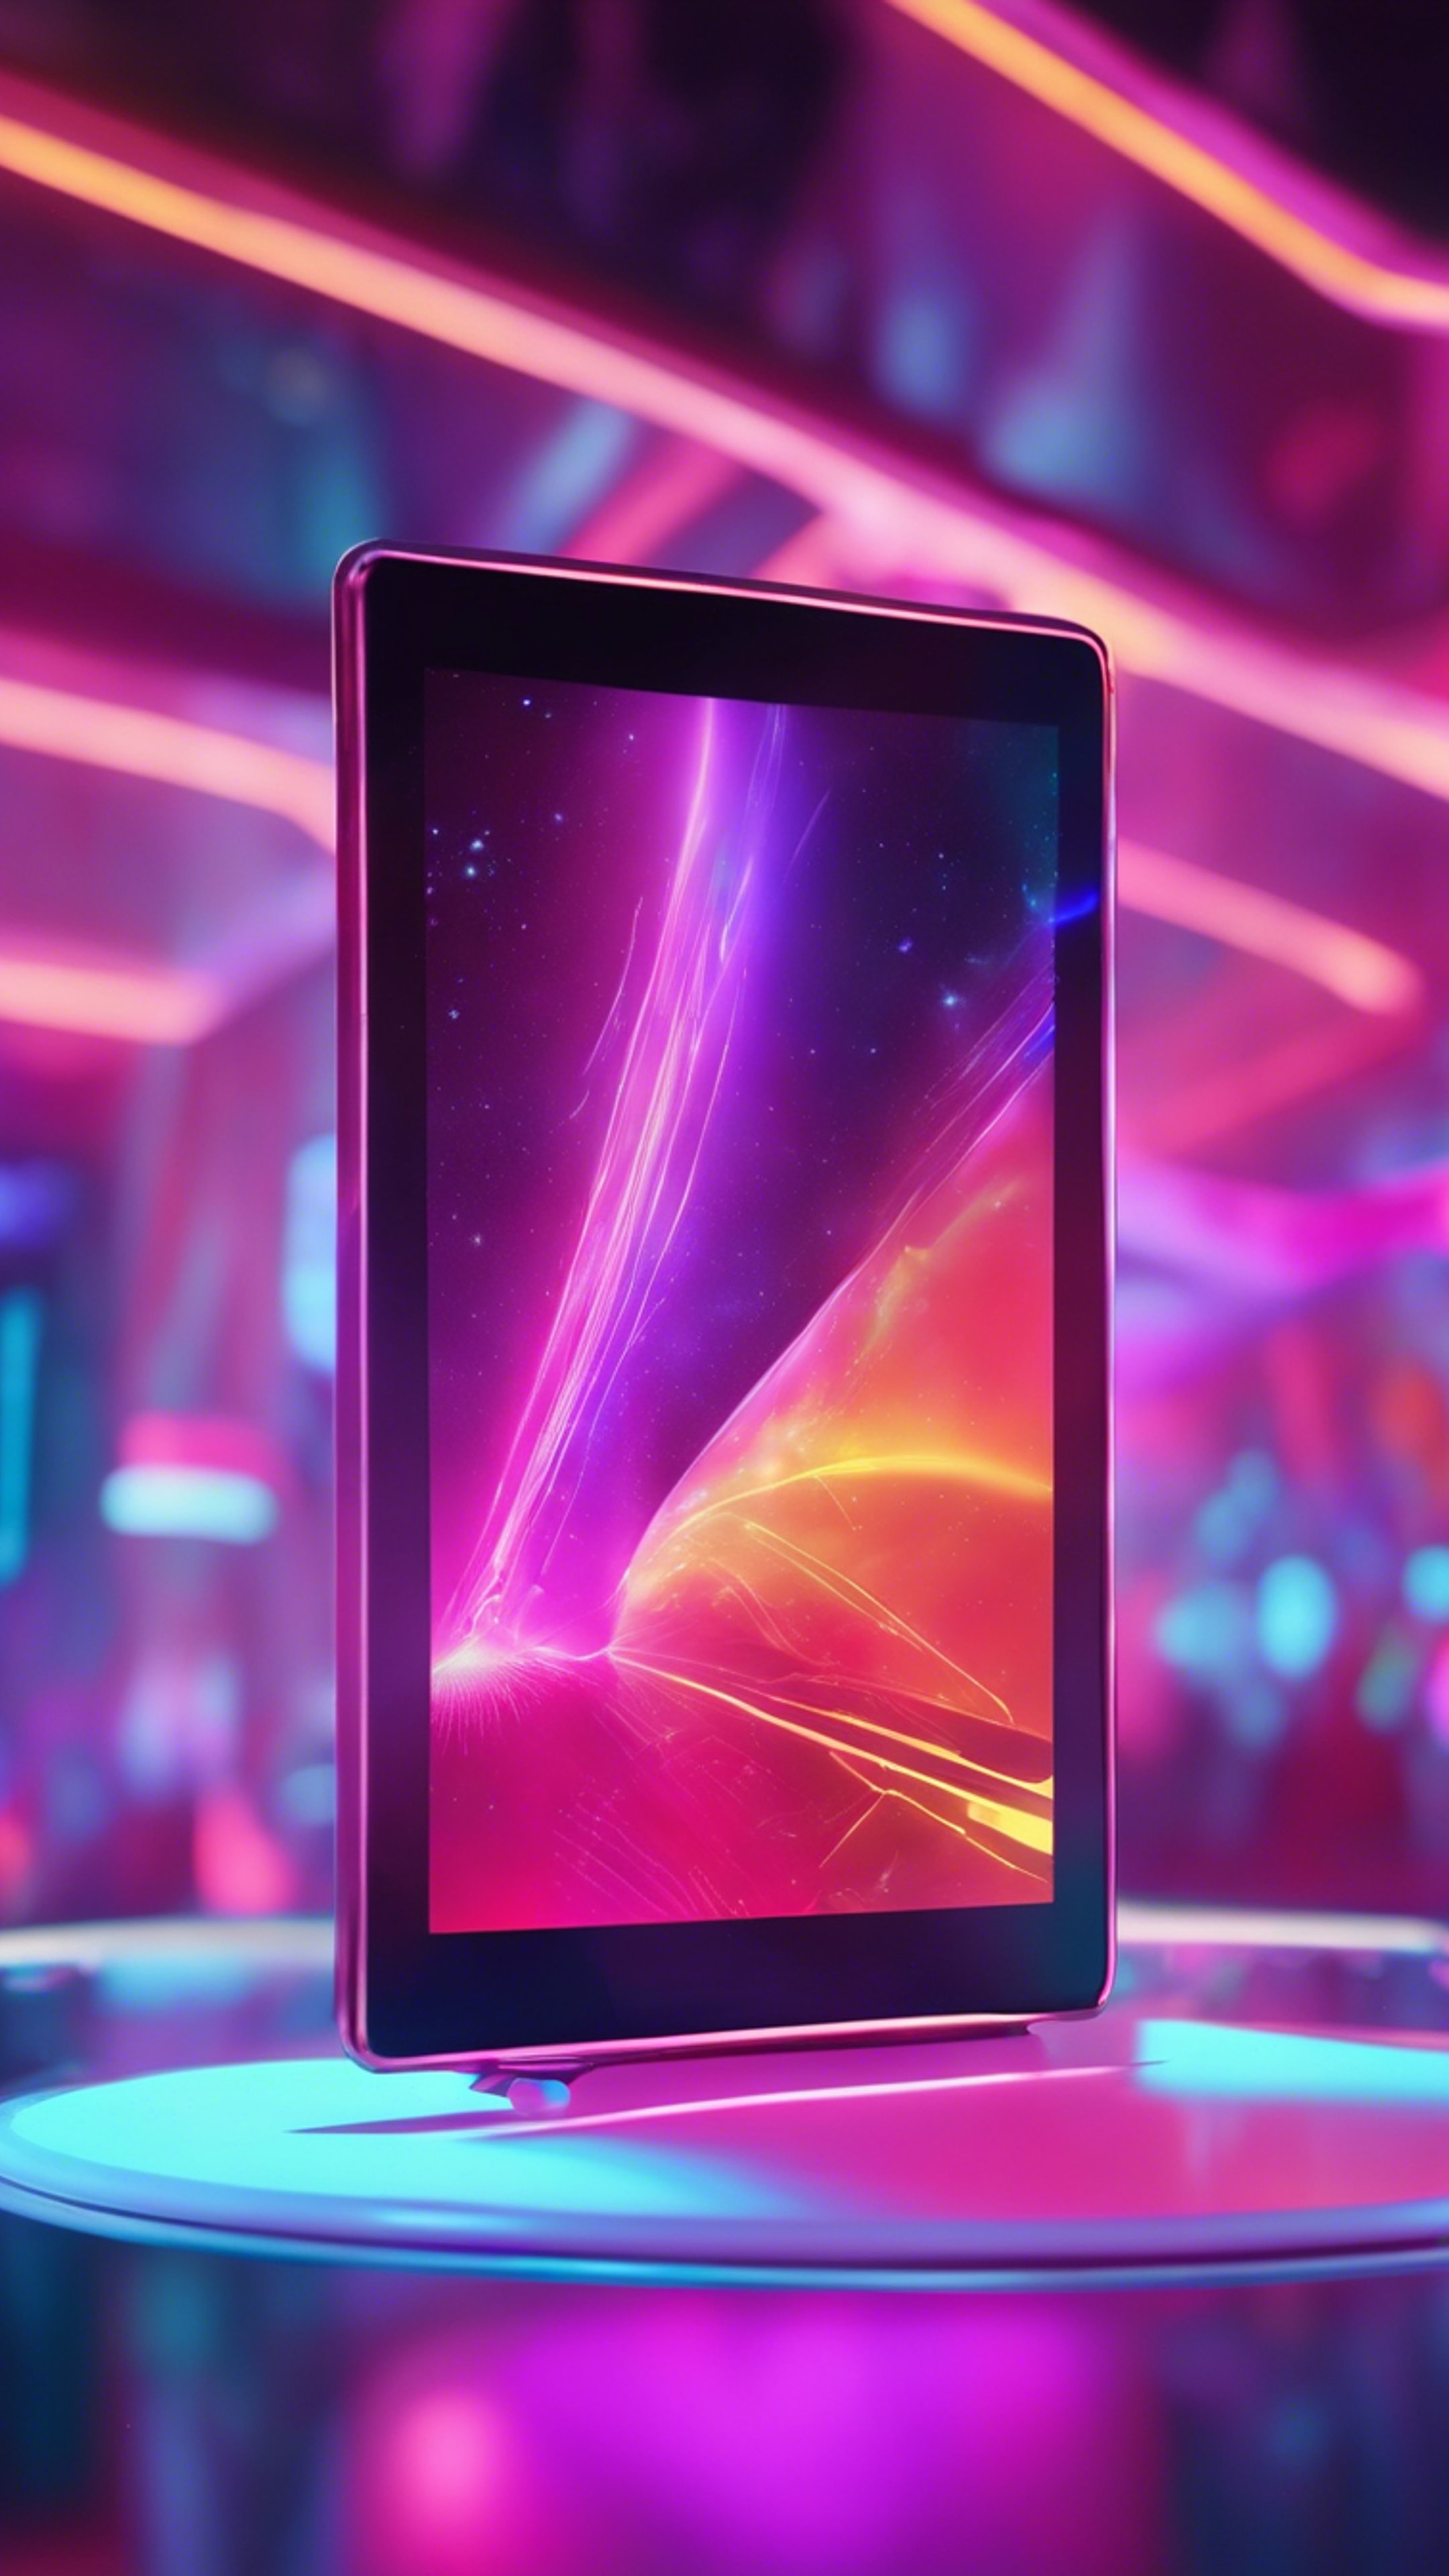 An ultra-modern tablet with a holographic touch screen floating in a futuristic, vividly colored neon environment. Wallpaper[25bfd648fdfb4eaf80d5]